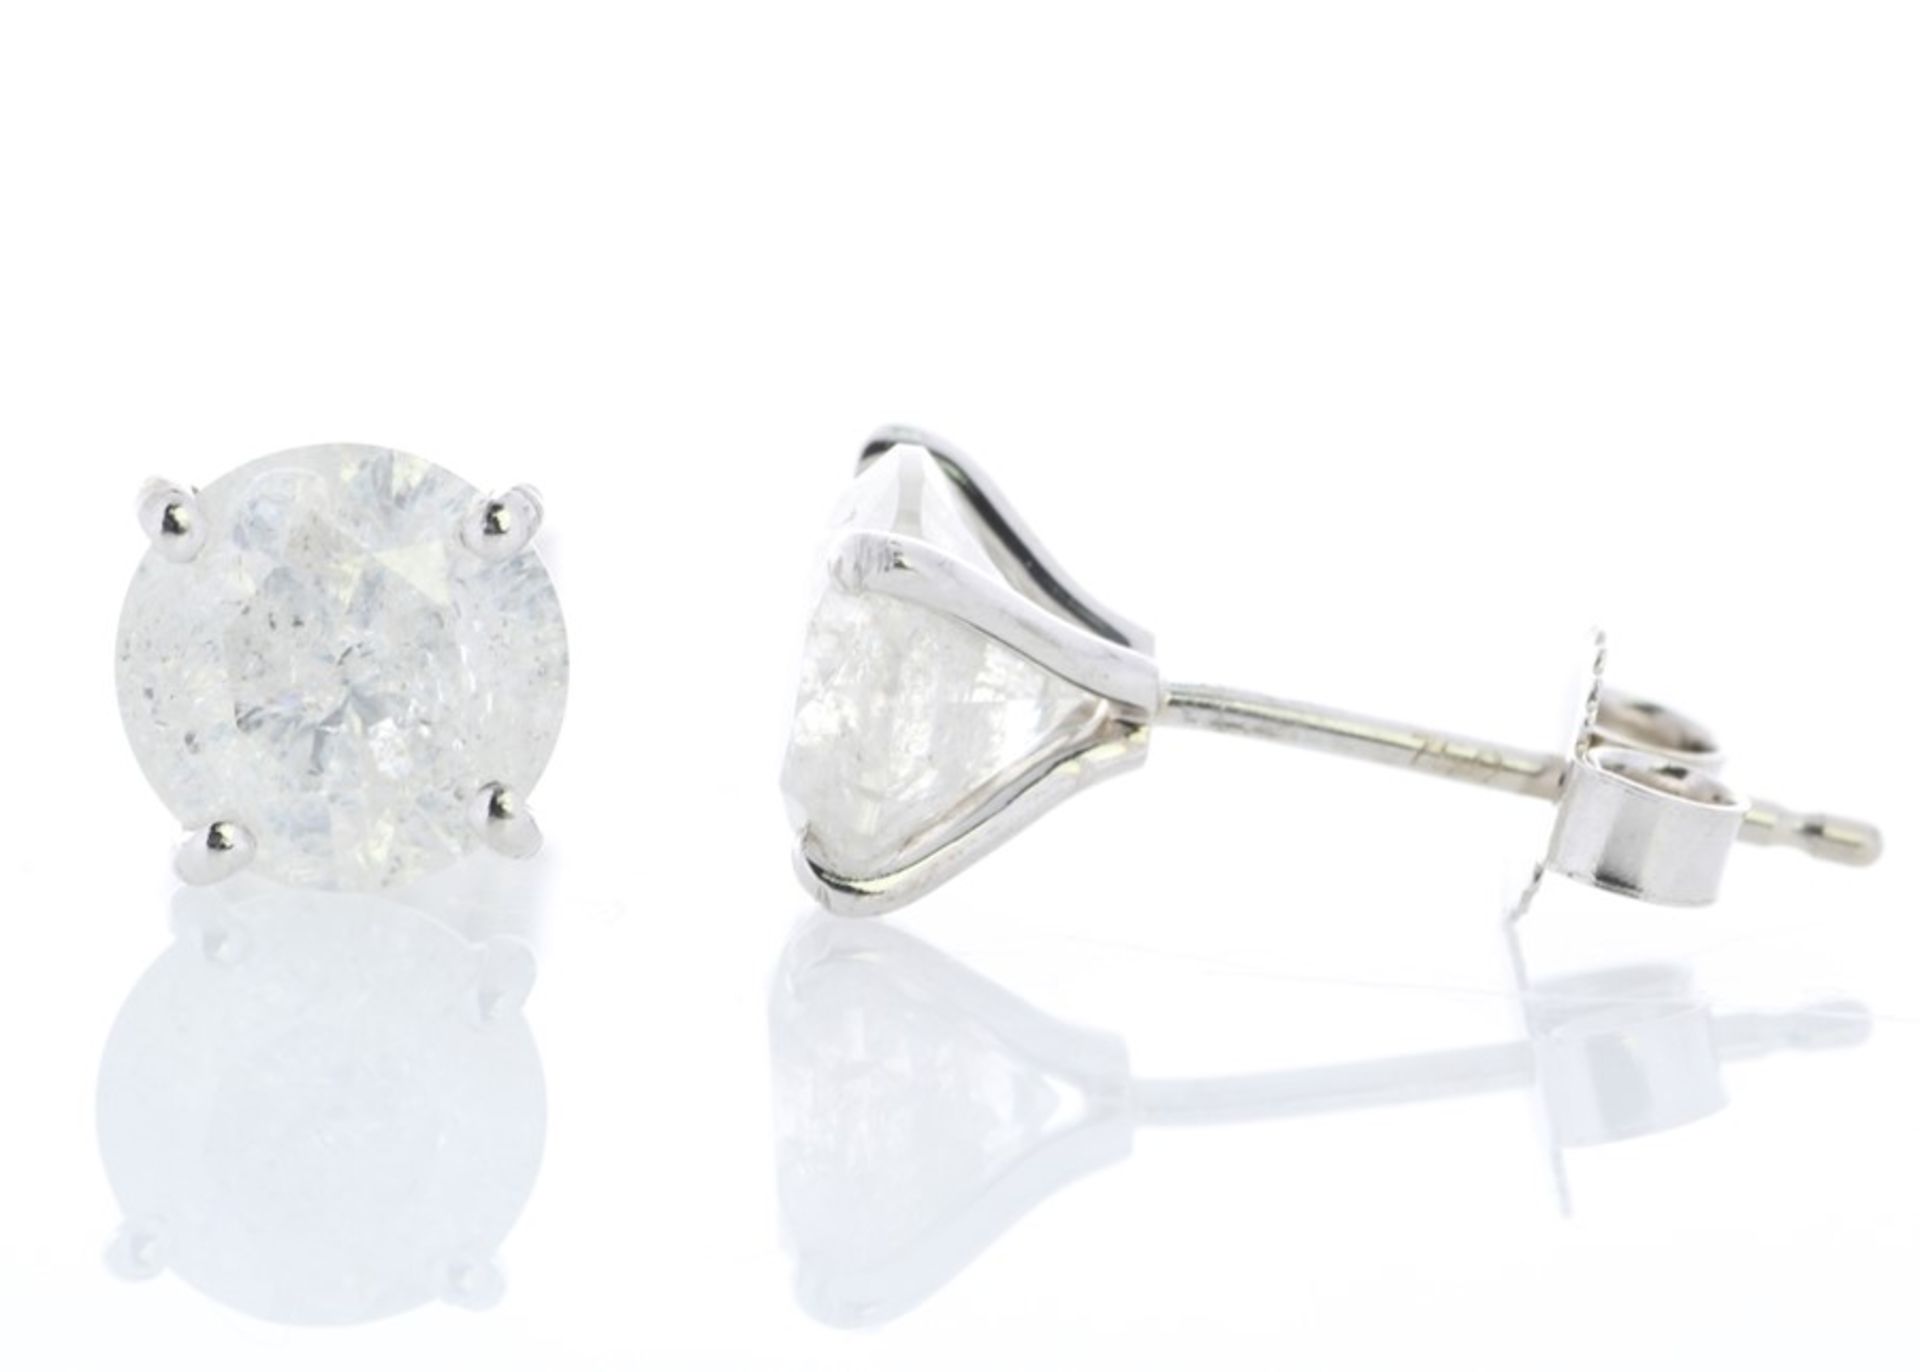 Valued by GIE £23,295.00 - 18ct White Gold Single Stone Prong Set Diamond Earring 2.26 Carats - - Image 2 of 3